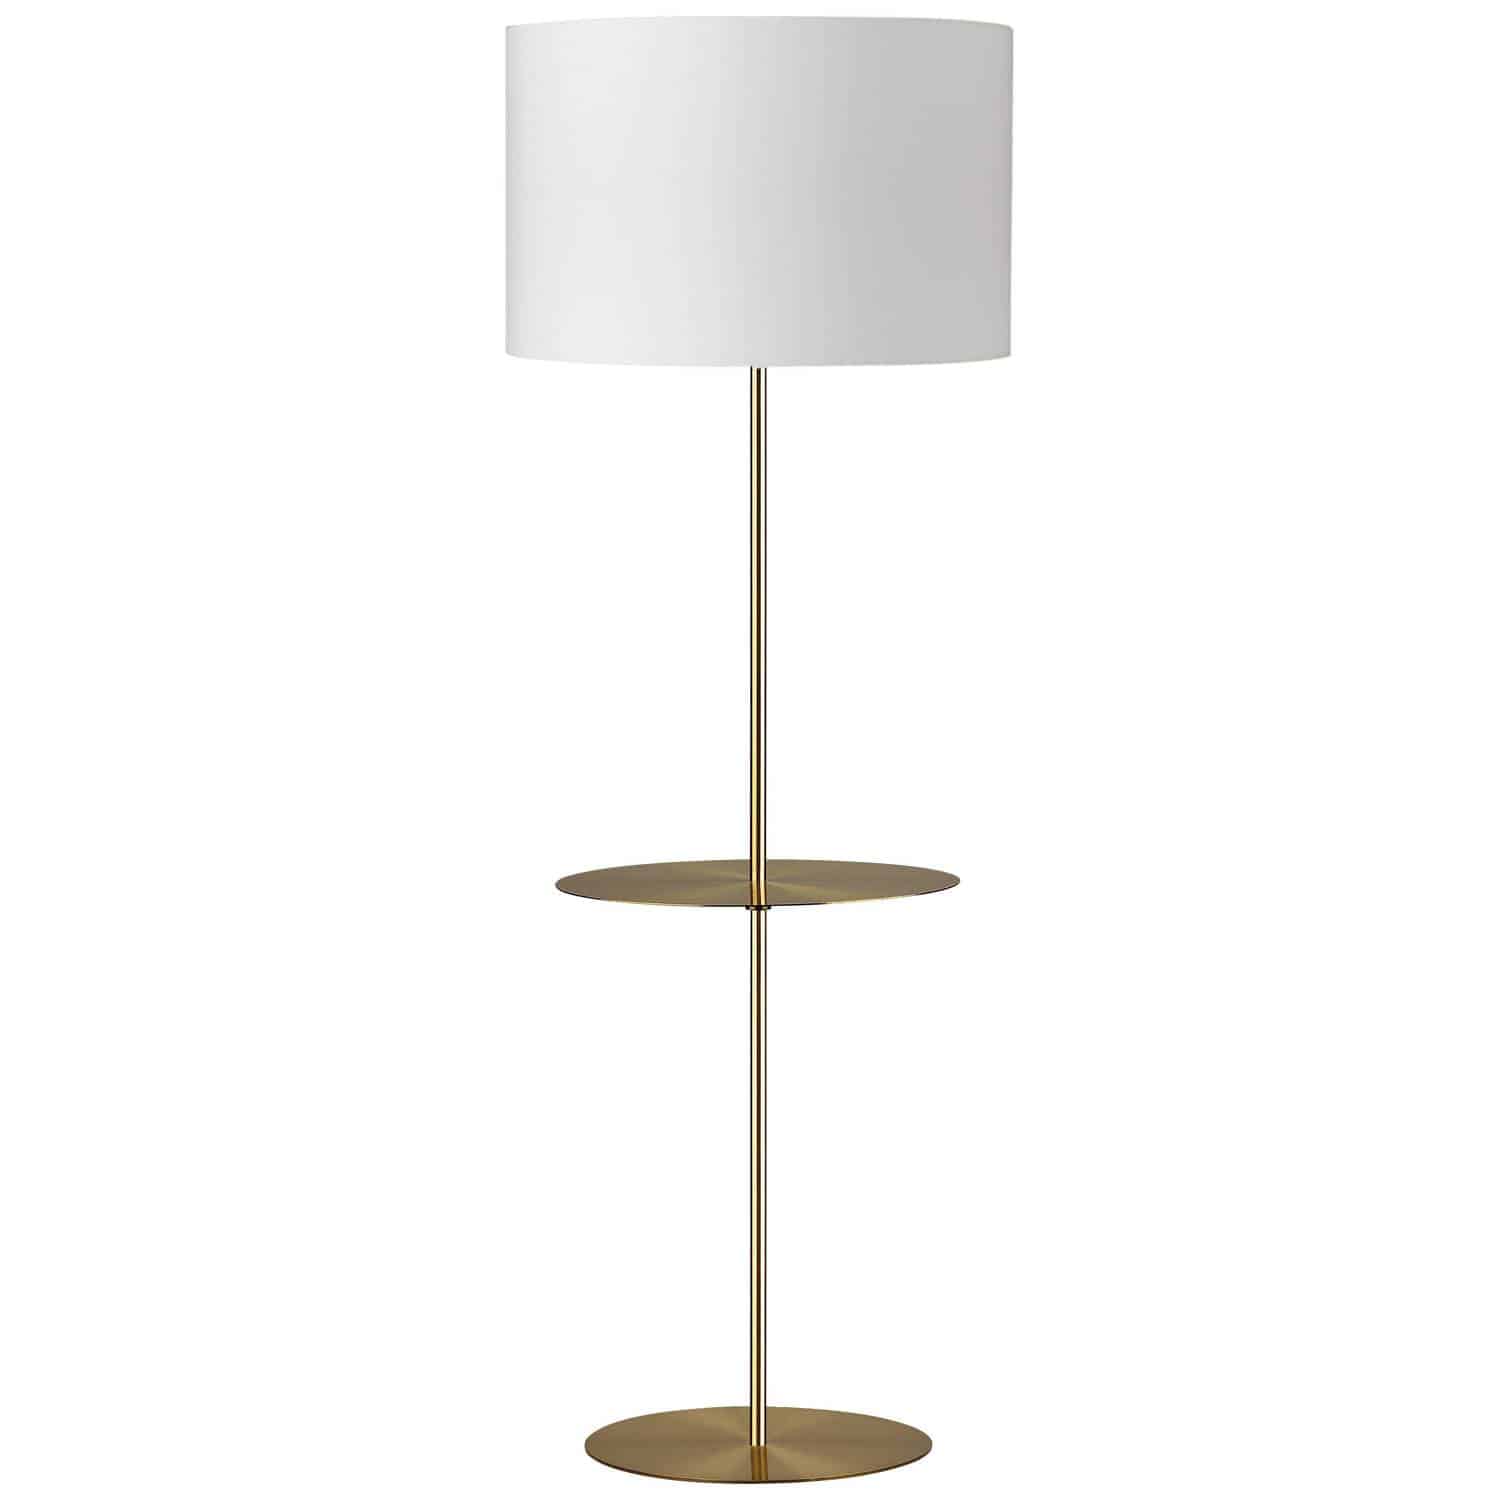 Incorporating a small table within its chic design, the Tablero family of lighting is ideal for spaces where you entertain. It's a functional construction delivered with artistic panache. The metal base holds an elegantly thin rod and a classic fabric shade. The hardback shade is available in either a round or square drum shape which will echo the base of the lamp. With its combination of traditional and modern forms, Tablero lighting will add a note of luxurious transitional style to a bedroom, living room or foyer.